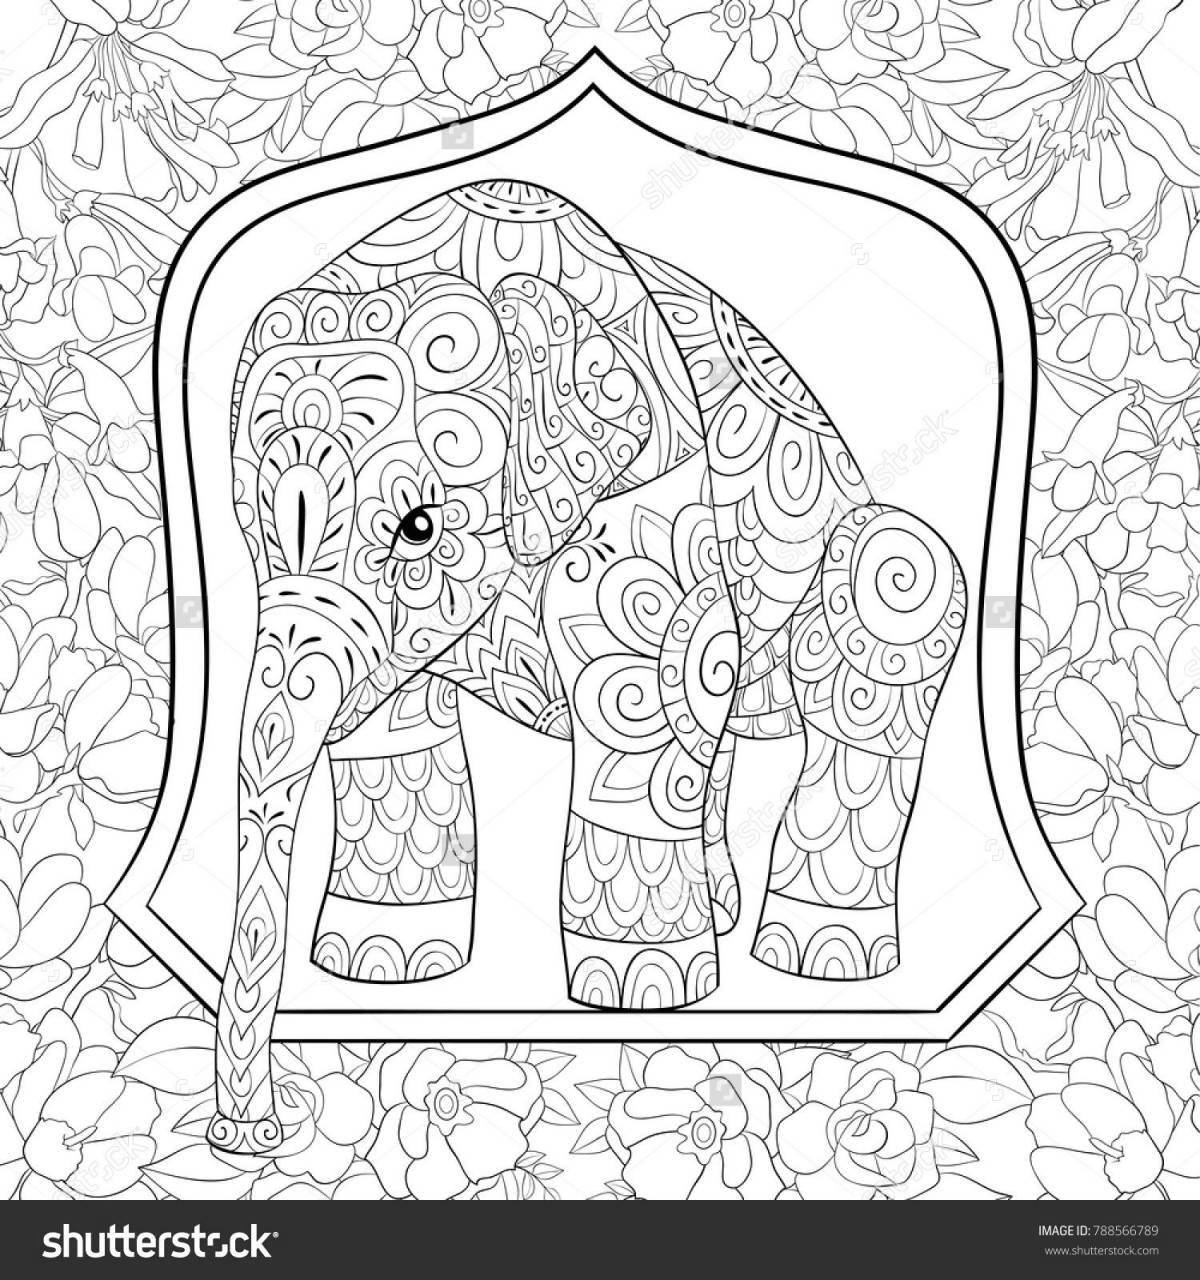 Violent elephant coloring by numbers